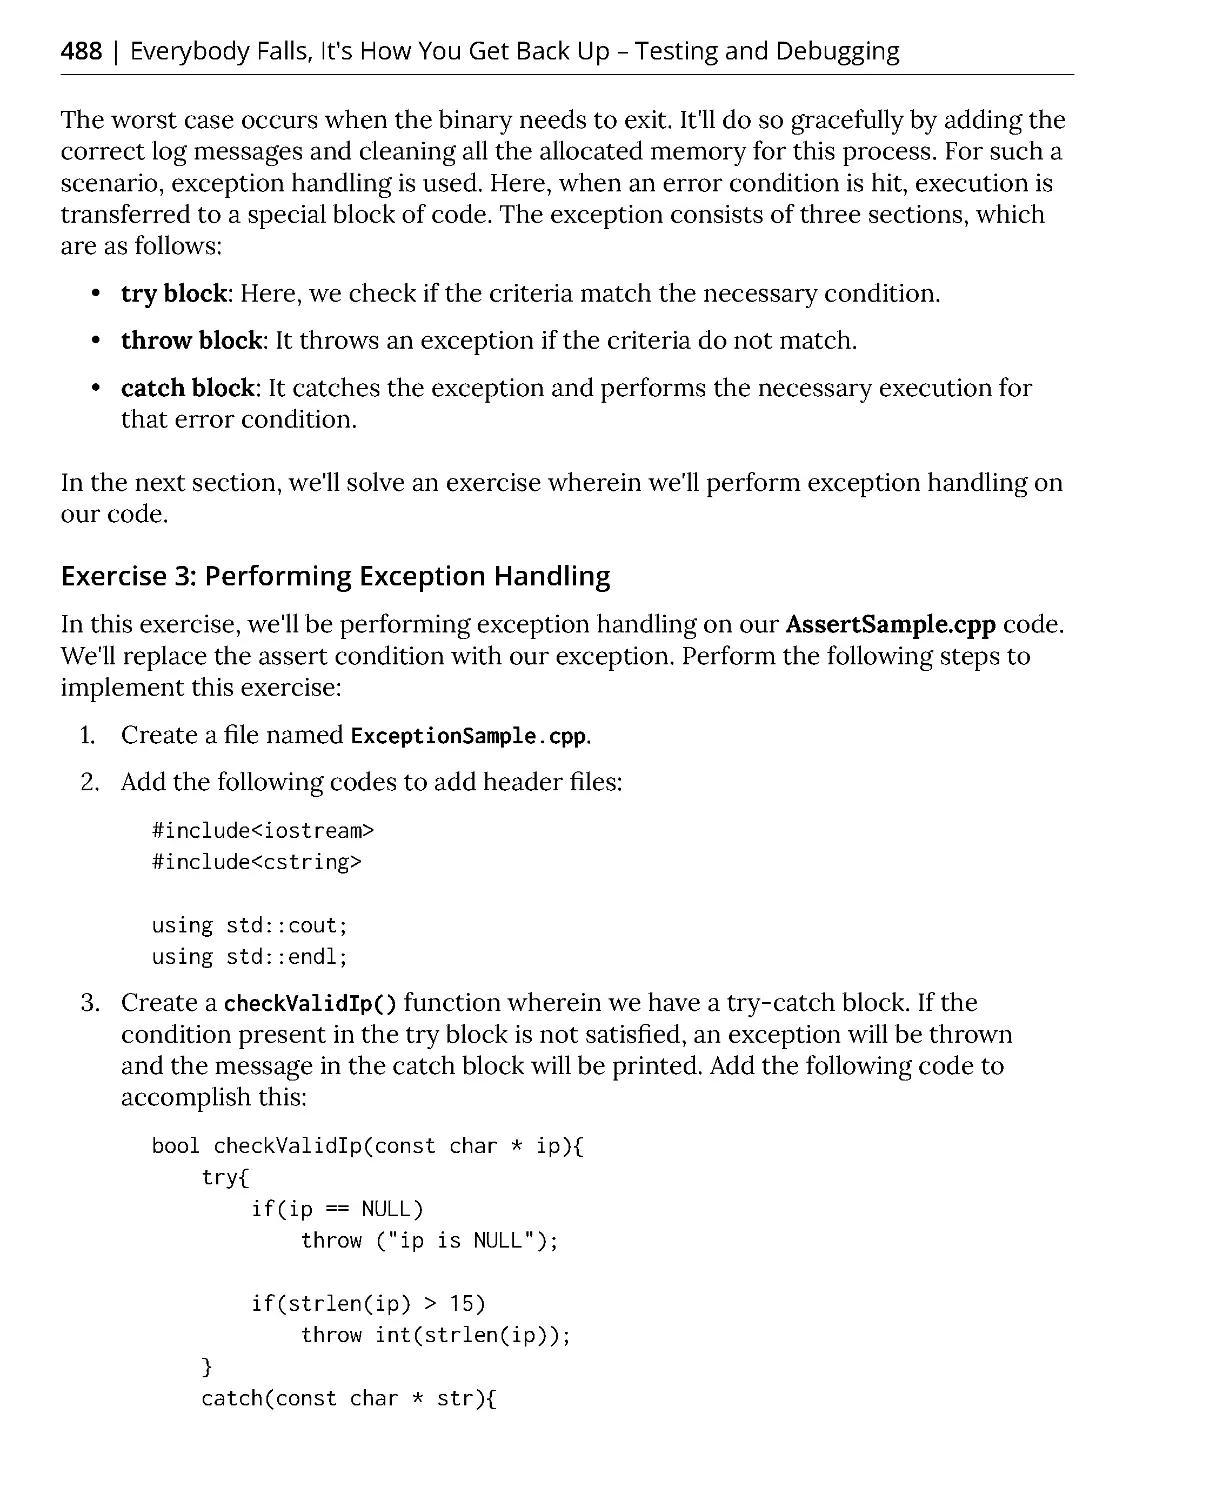 Exercise 3: Performing Exception Handling